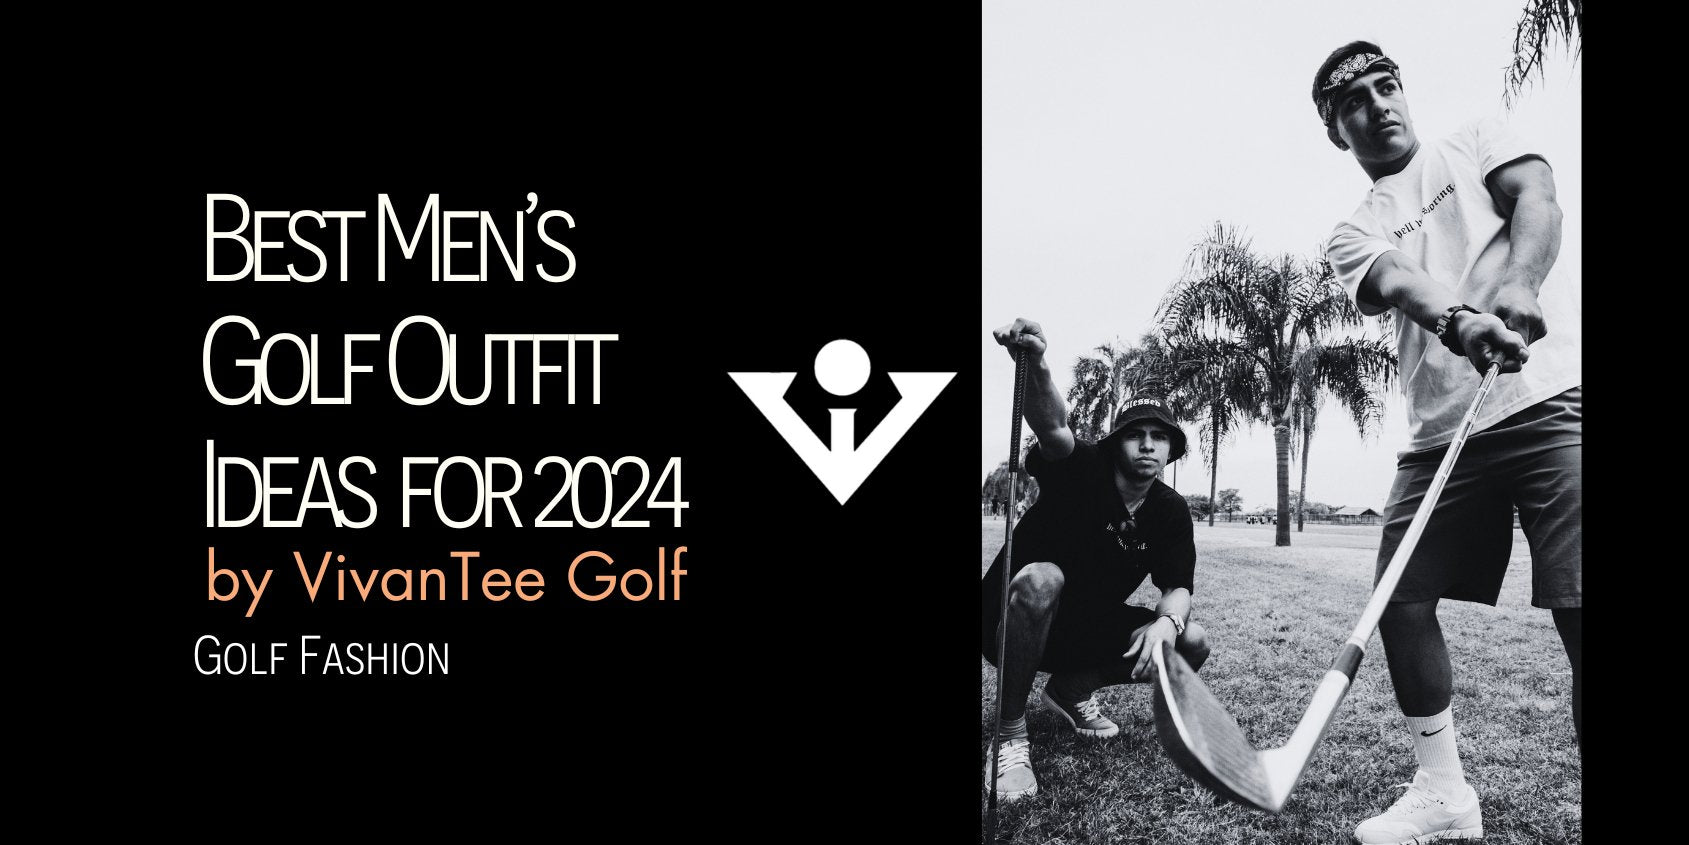 Image of two stylish golfers in a monochromatic setting with palm trees in the background in our signature style blog banner for best men's golf outfit ideas.